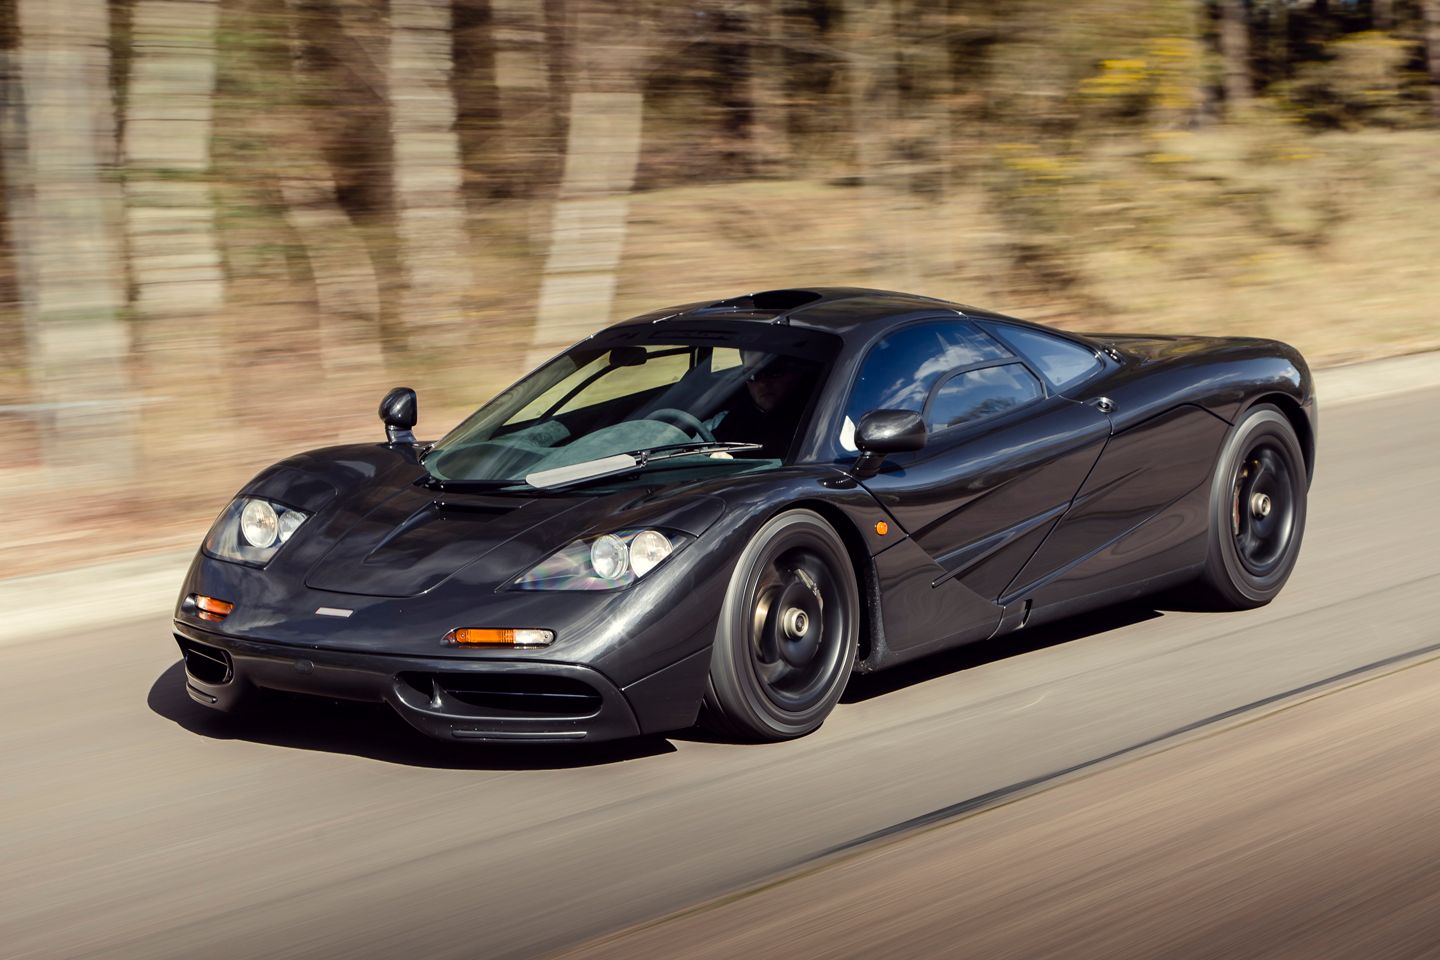 McLaren F1 - Ultimate Guide Including Specs, Performance & Much More